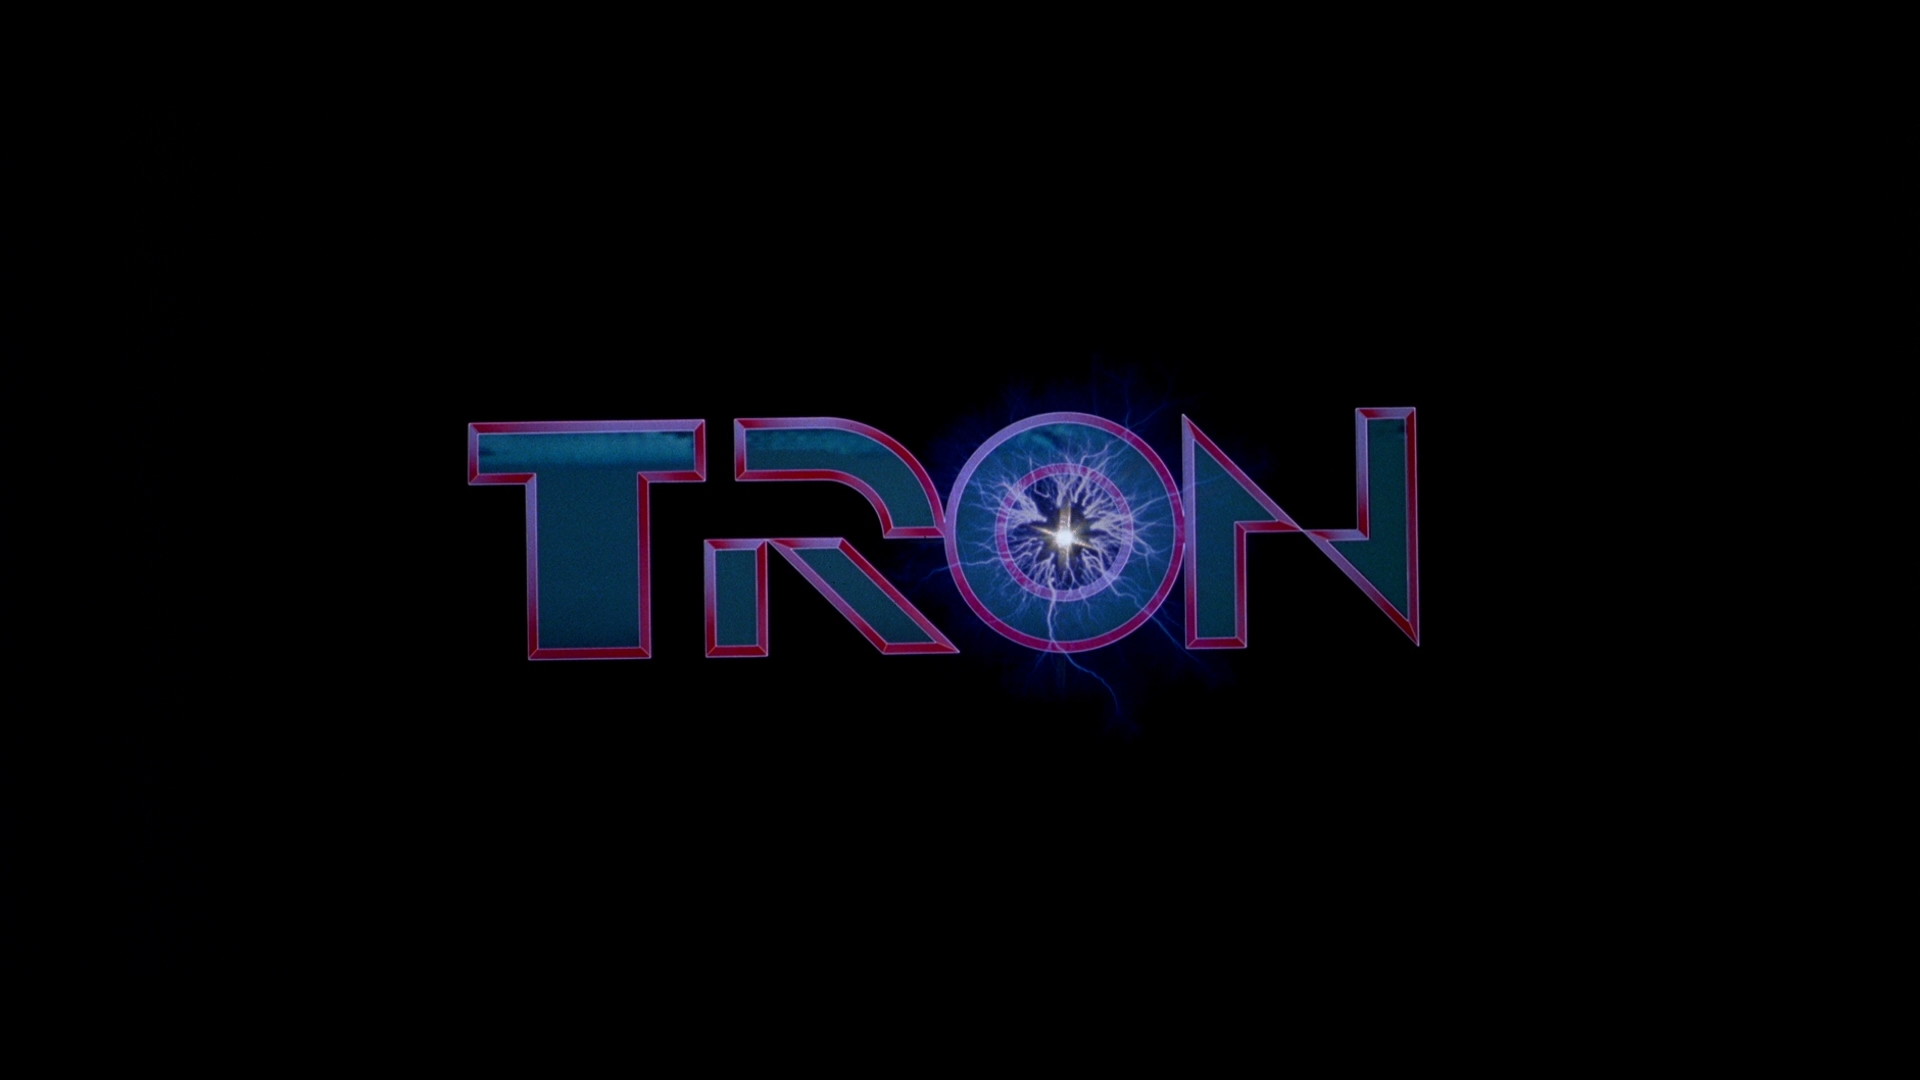 1920x1080 Tron Arcade. The classic Tron Games, Arcade Machines and Artworks.